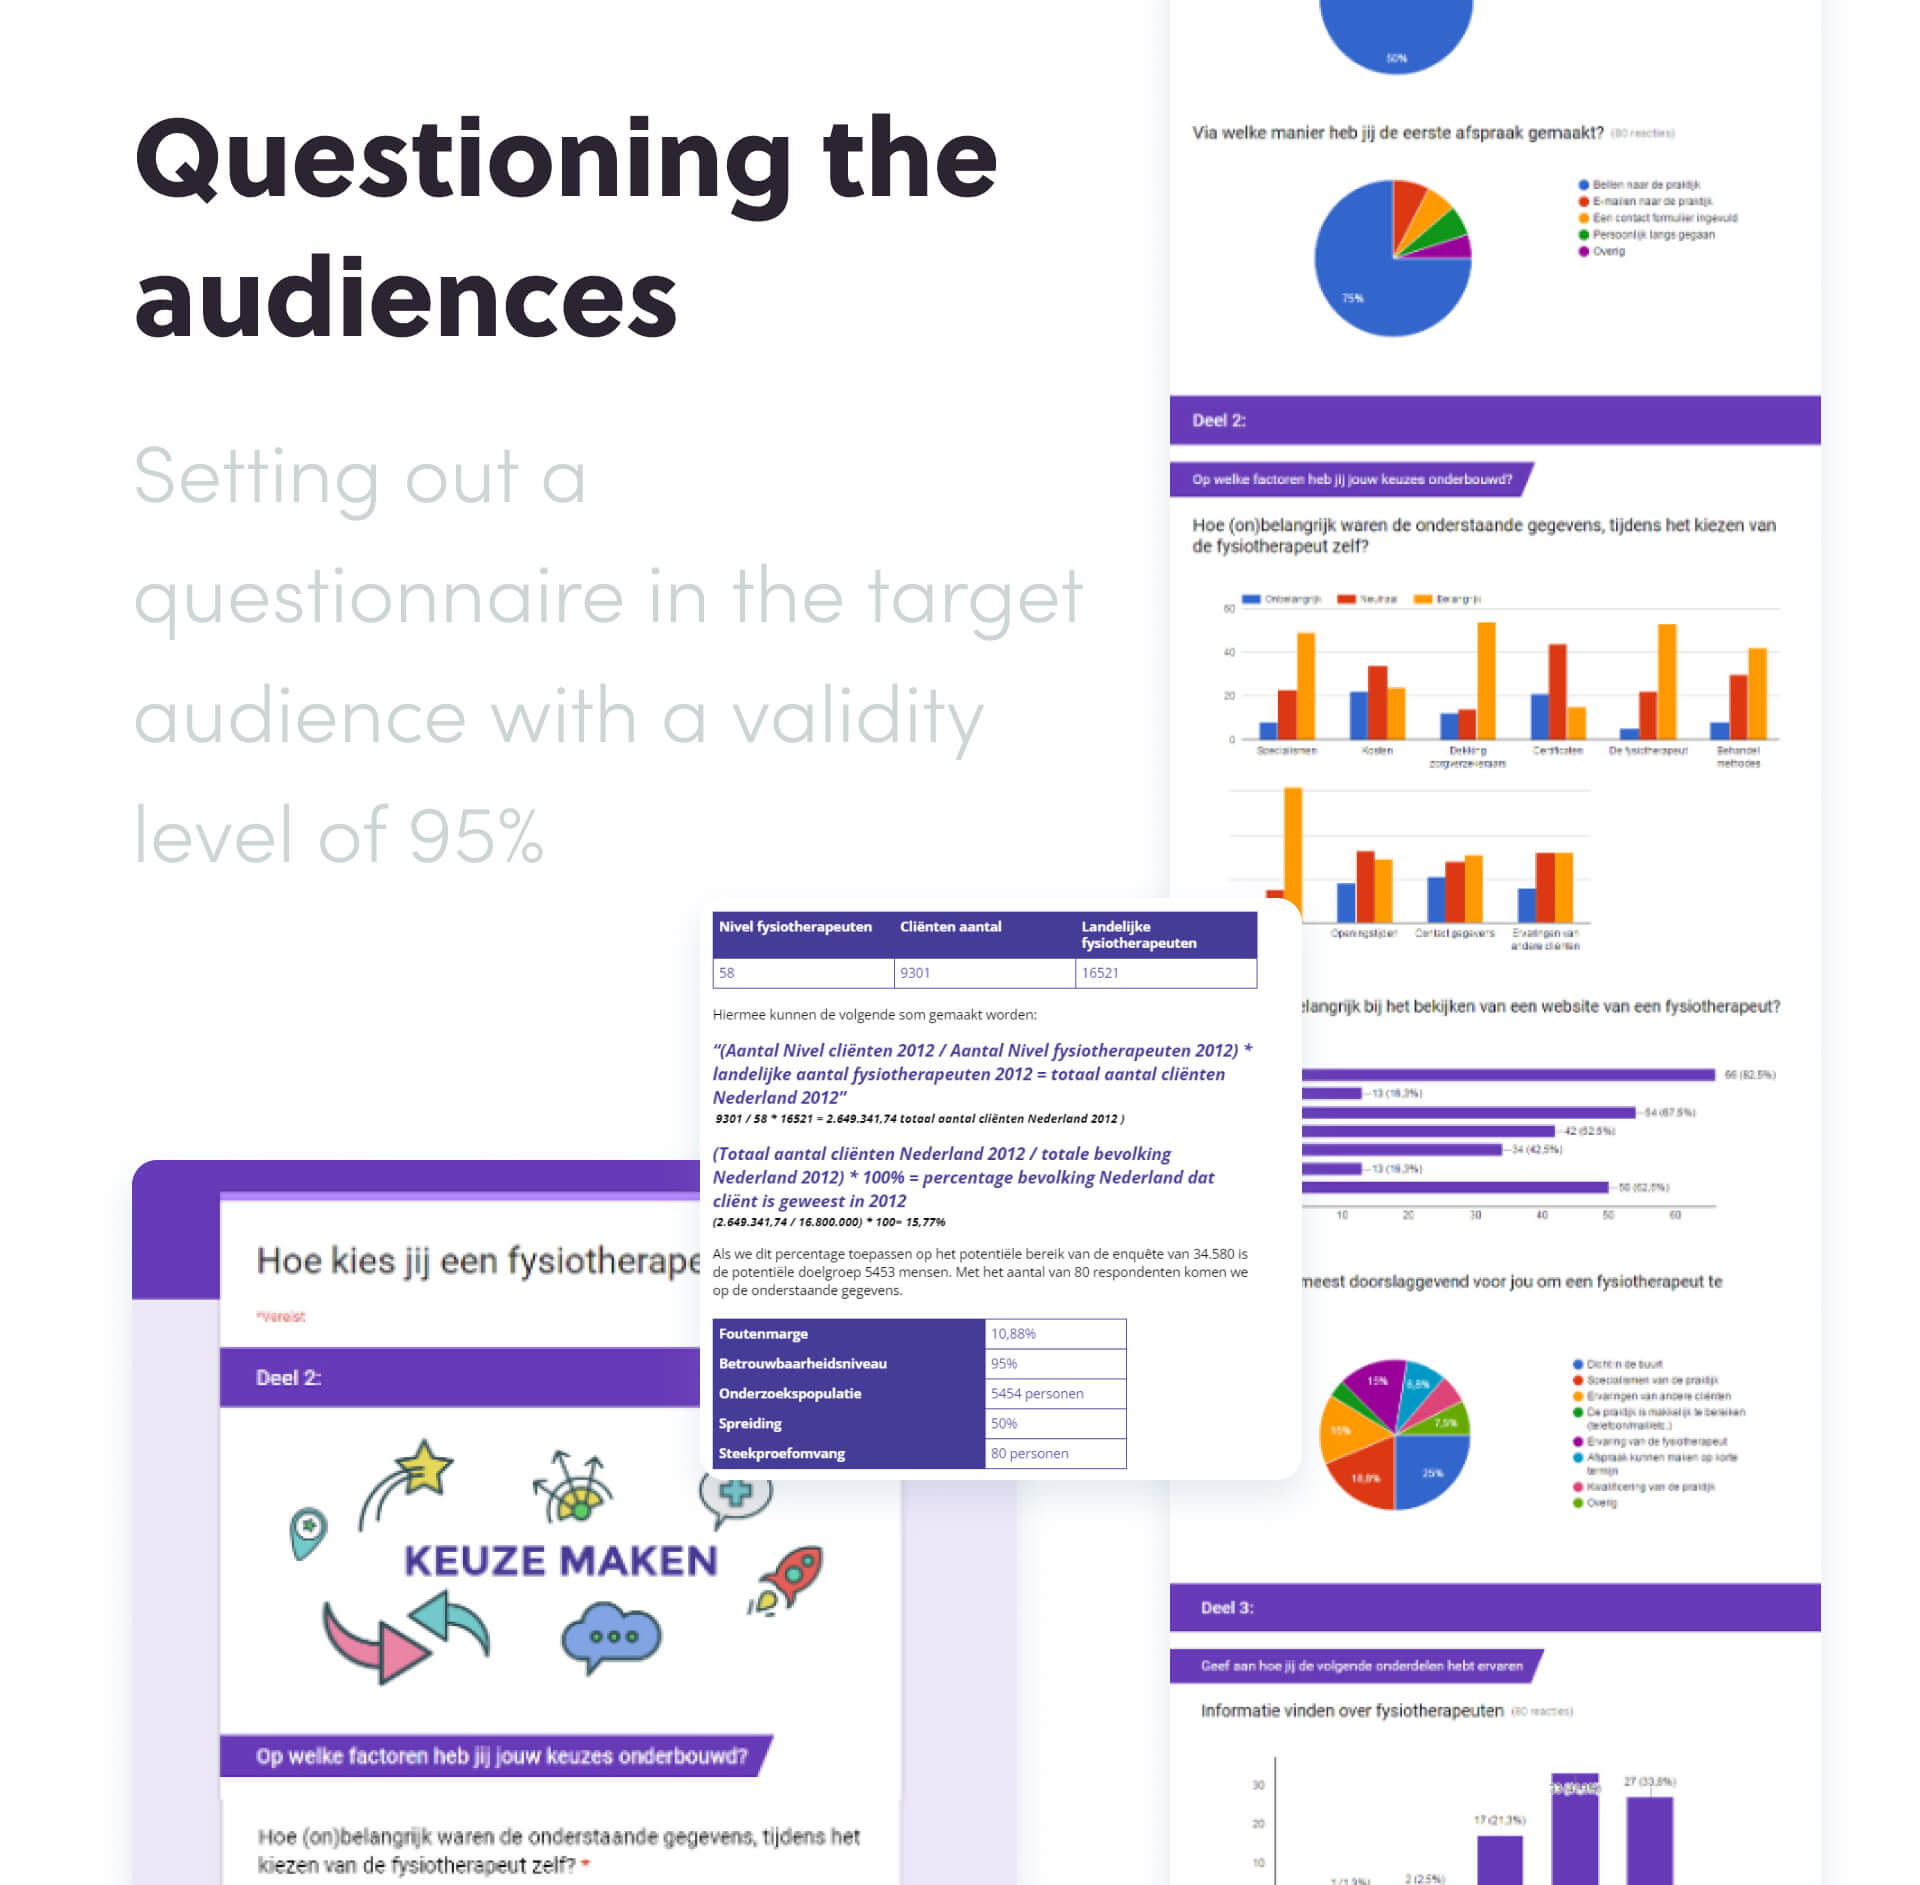 Presentation slide showing audience research with graphics and charts on questionnaire validity for target audience analysis.